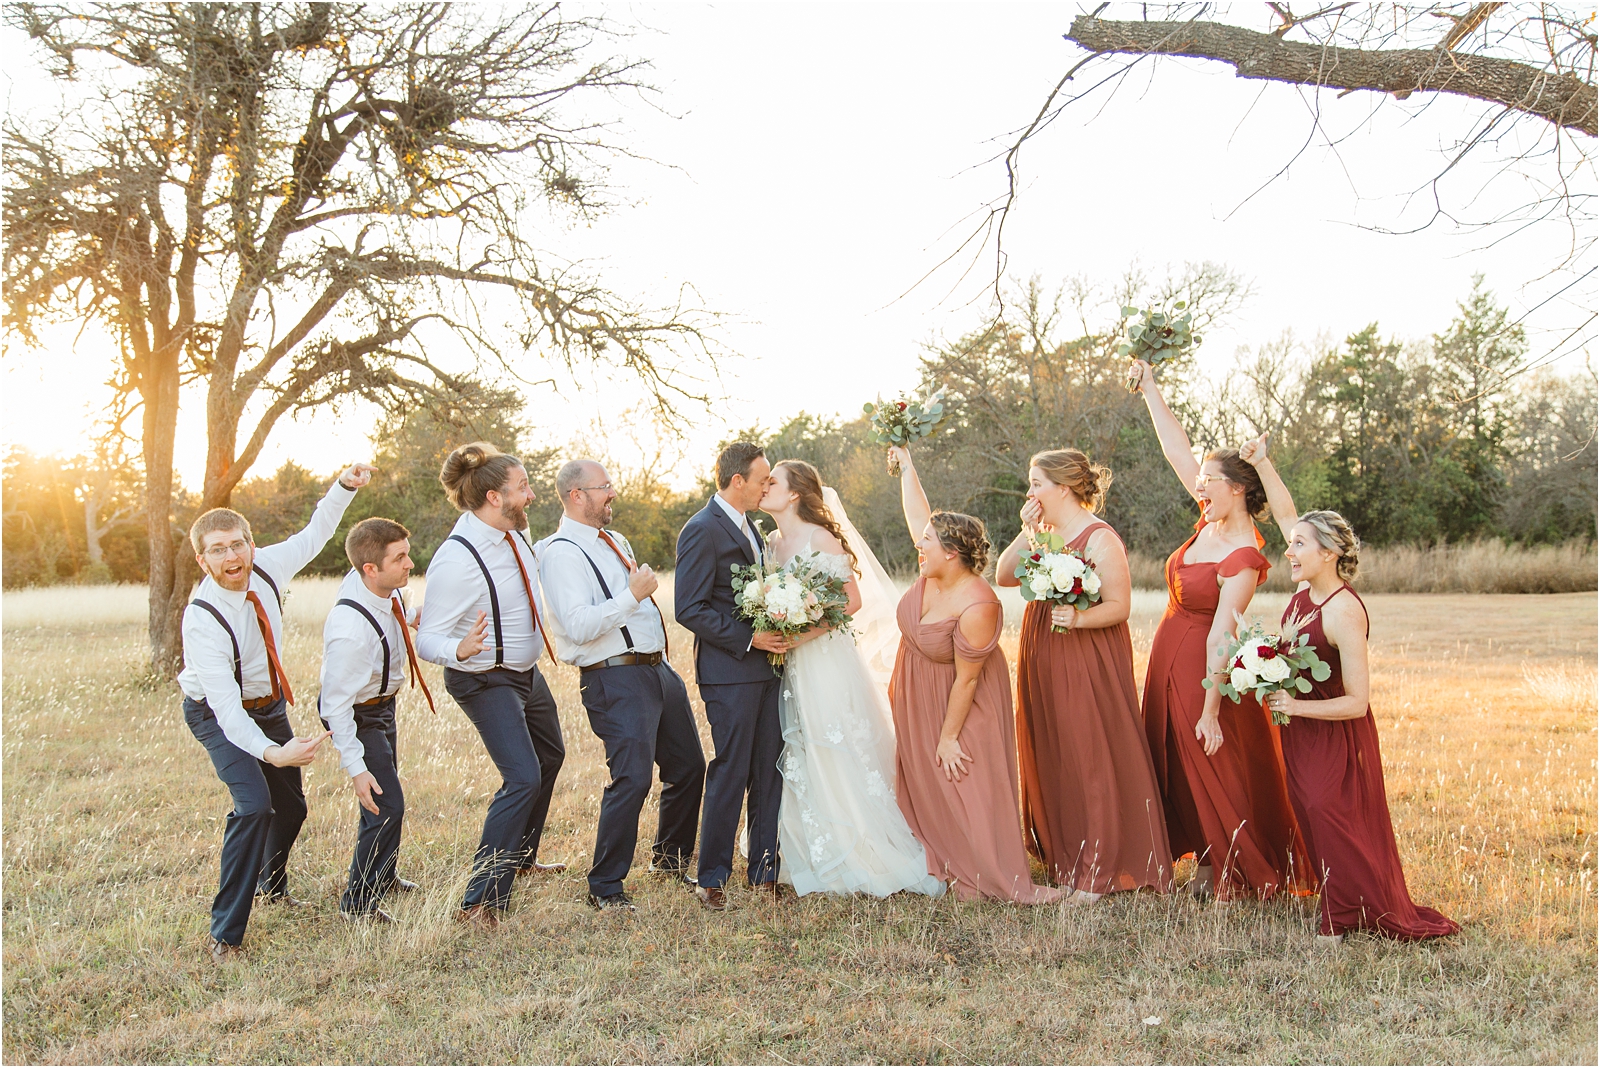 bridal party celebrating while the bride and groom kiss in Boise Idaho. Photo by Miranda Renee Photography